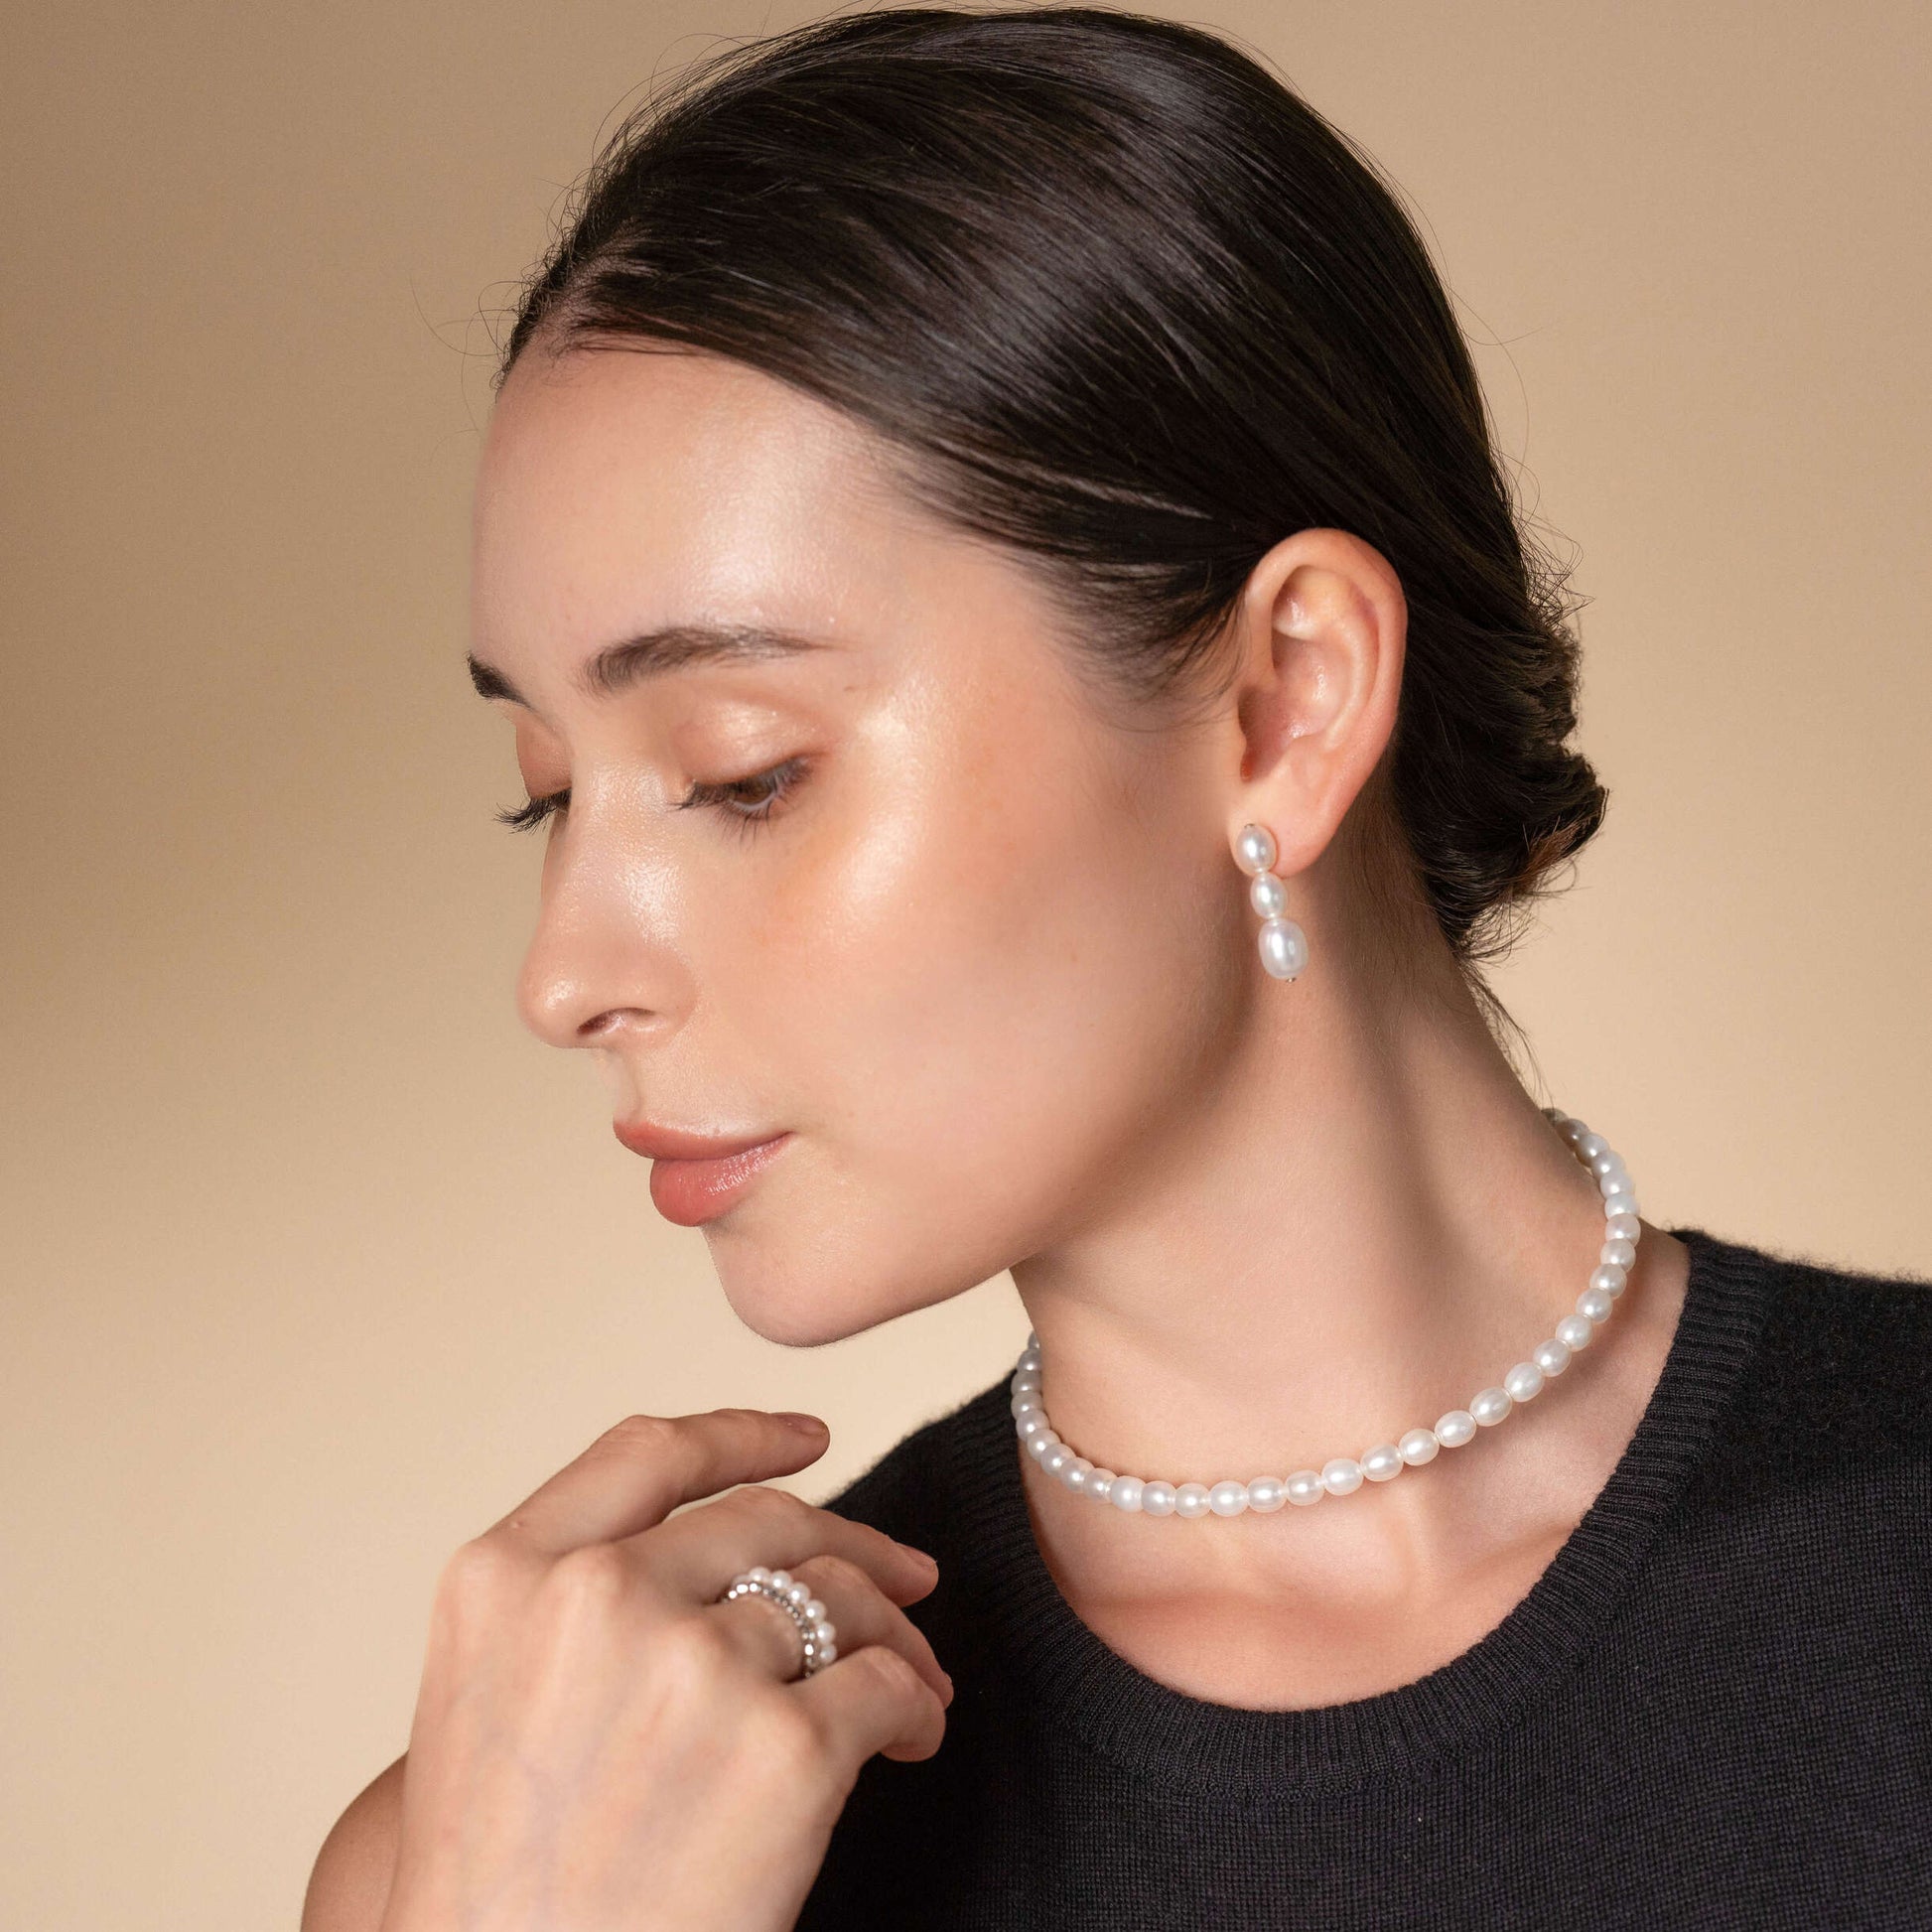 Discover timeless beauty as a woman showcases her sophistication with a pearl necklace and earrings. Complete your ensemble with an alluring Oval Pearl Charm Choker.